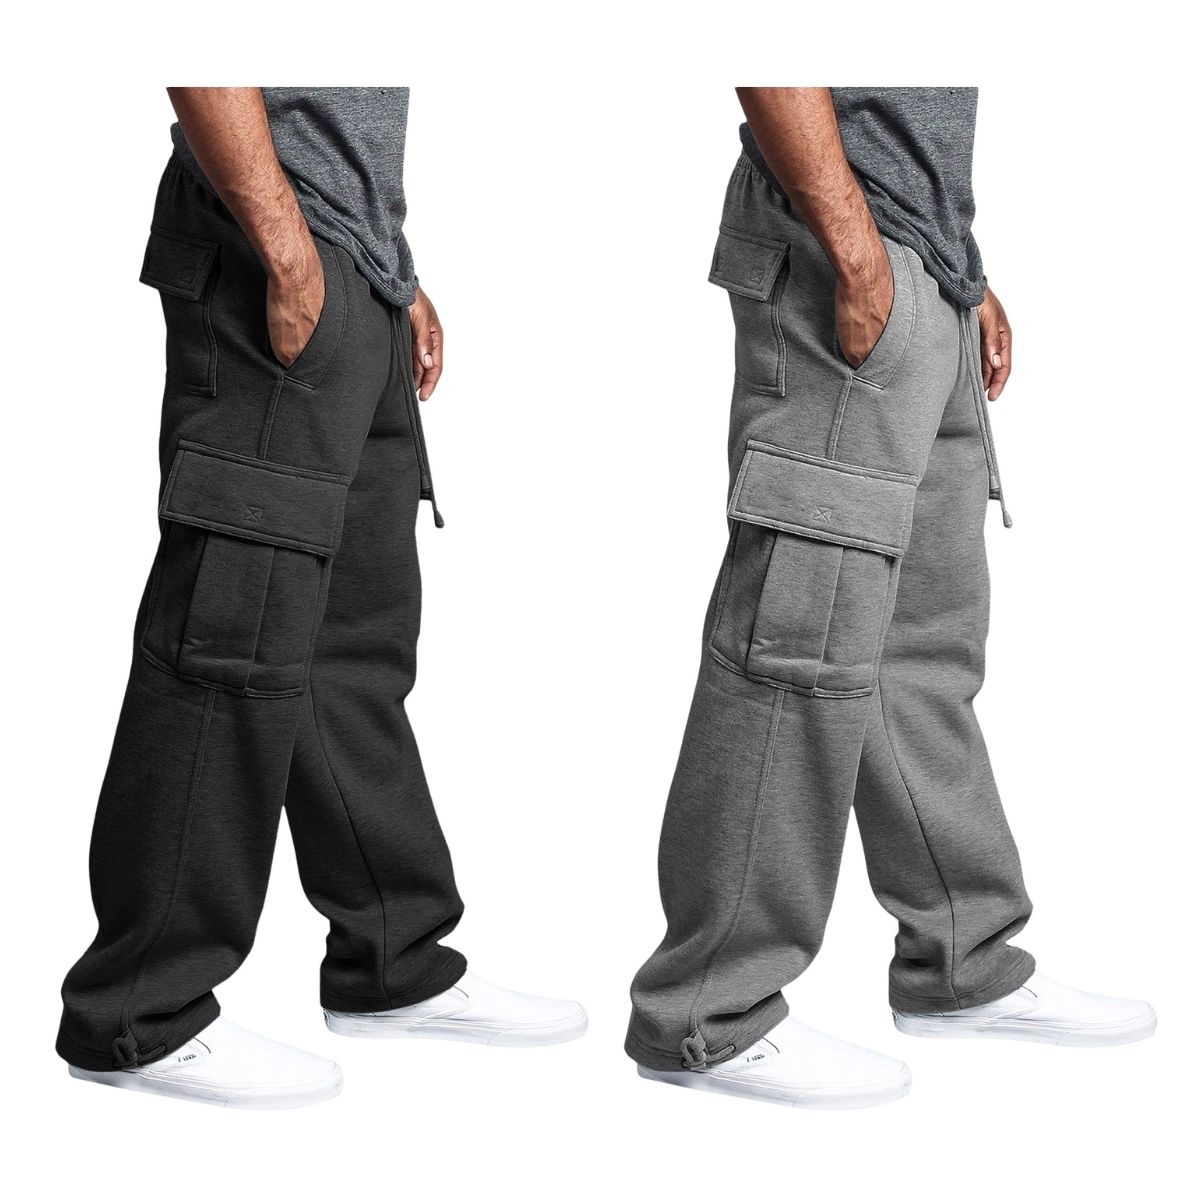 2-Pack: Men's Casual Solid Fleece Lined Cargo Jogger Soft Sweatpants With Pockets - Black&grey, Xx-large